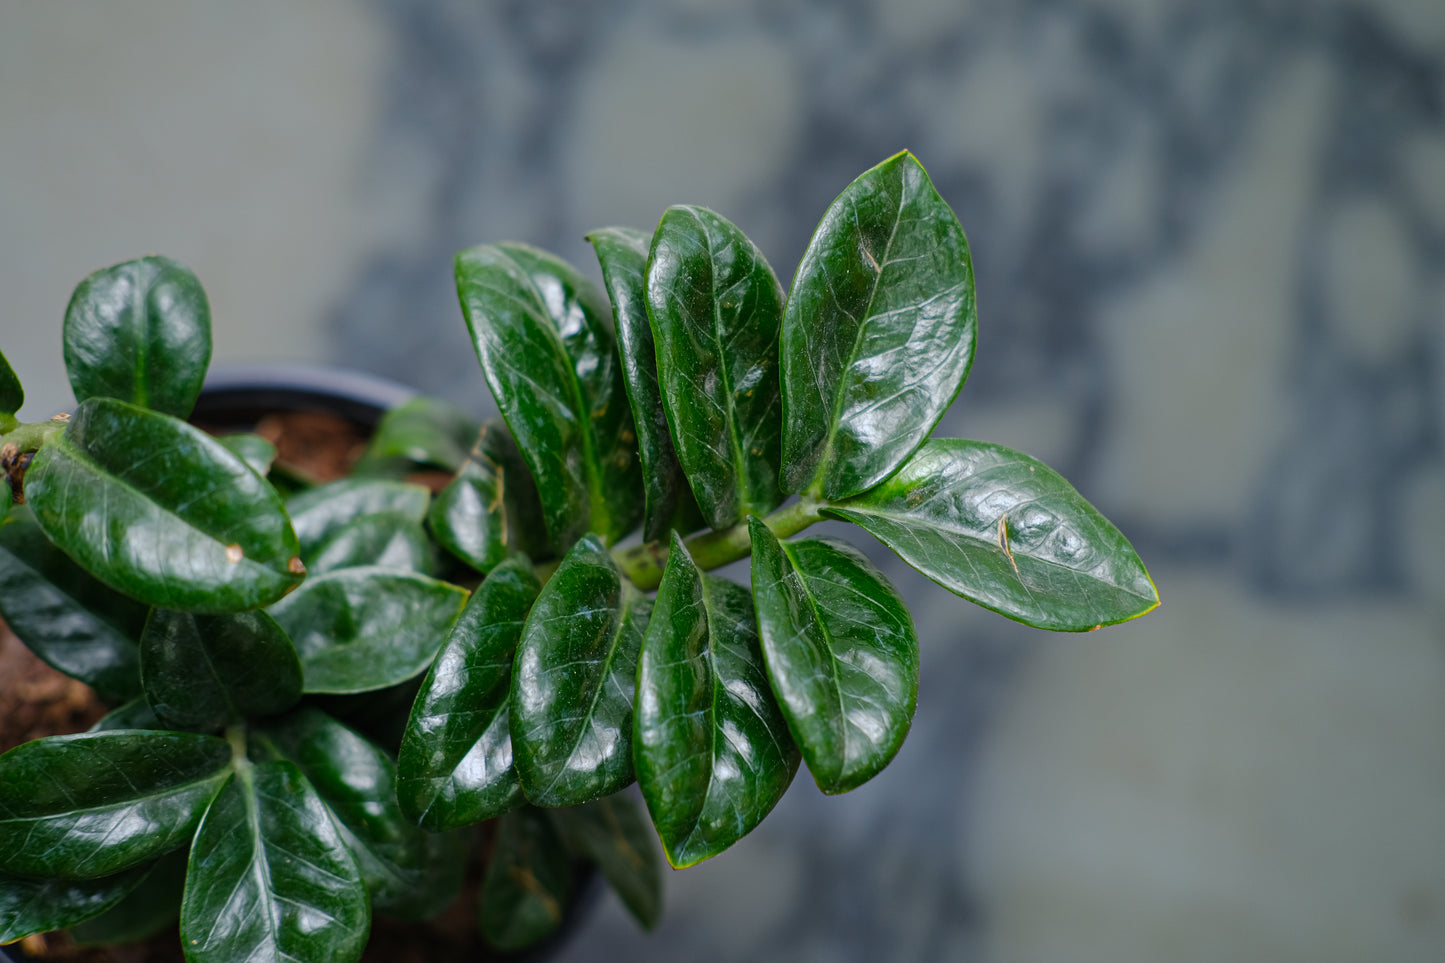 ZZ Plant Compact Leaf (Zamioculcas zamiifolia 'Zenzi') in a 6 inch pot. Indoor plant for sale by Promise Supply for delivery and pickup in Toronto